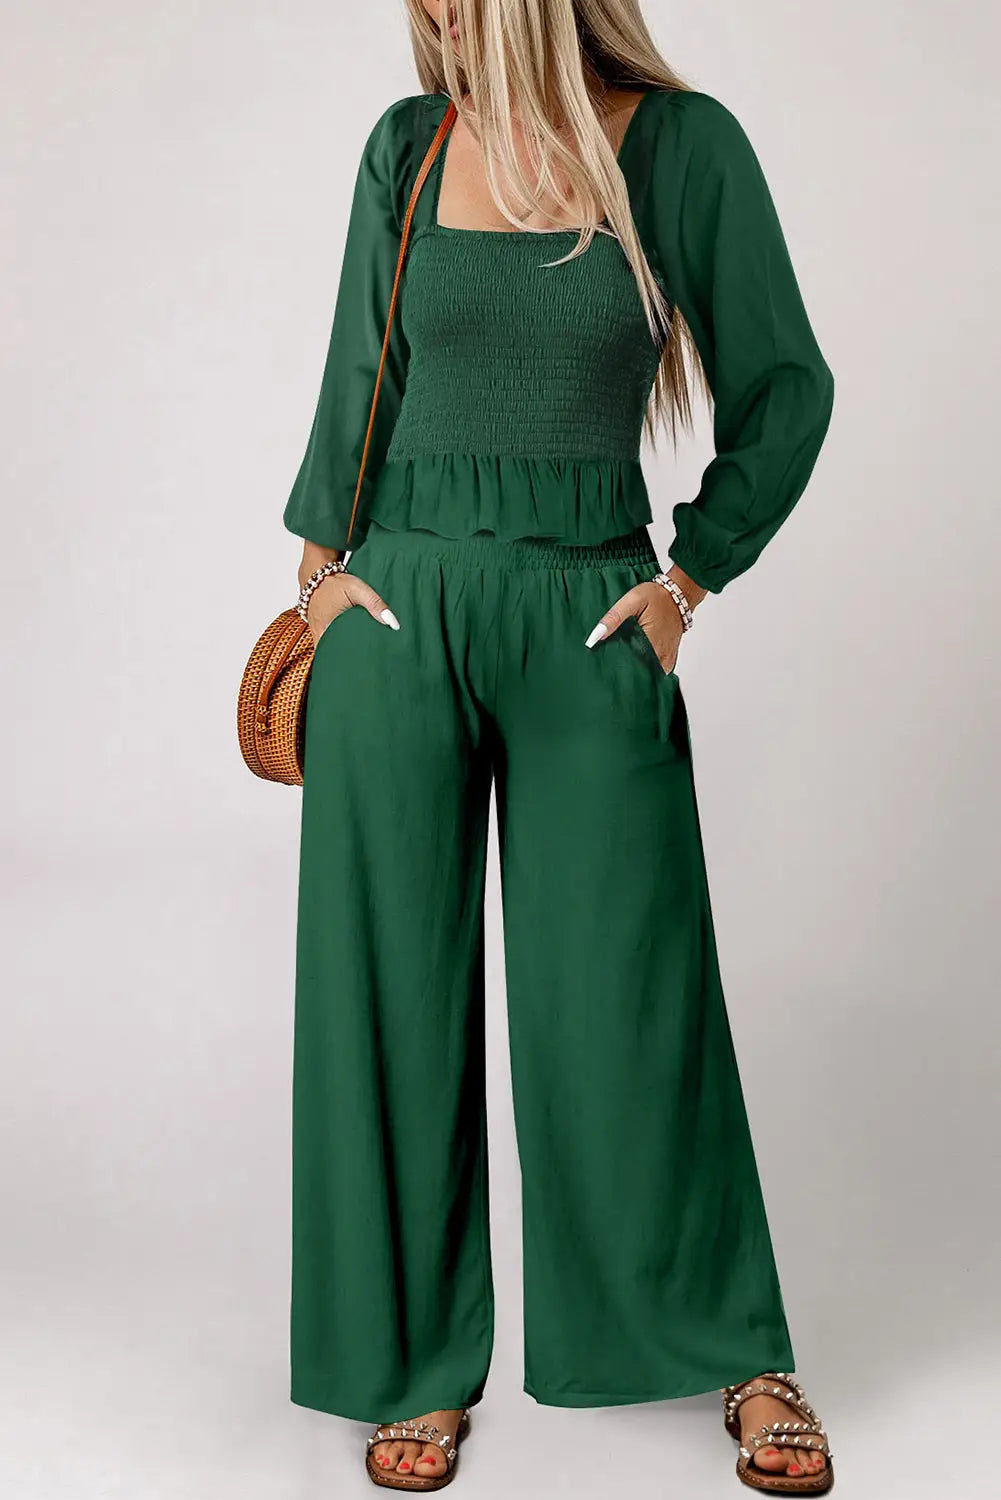 Green square neck smocked peplum top and pants set - l / 100% polyester - sets